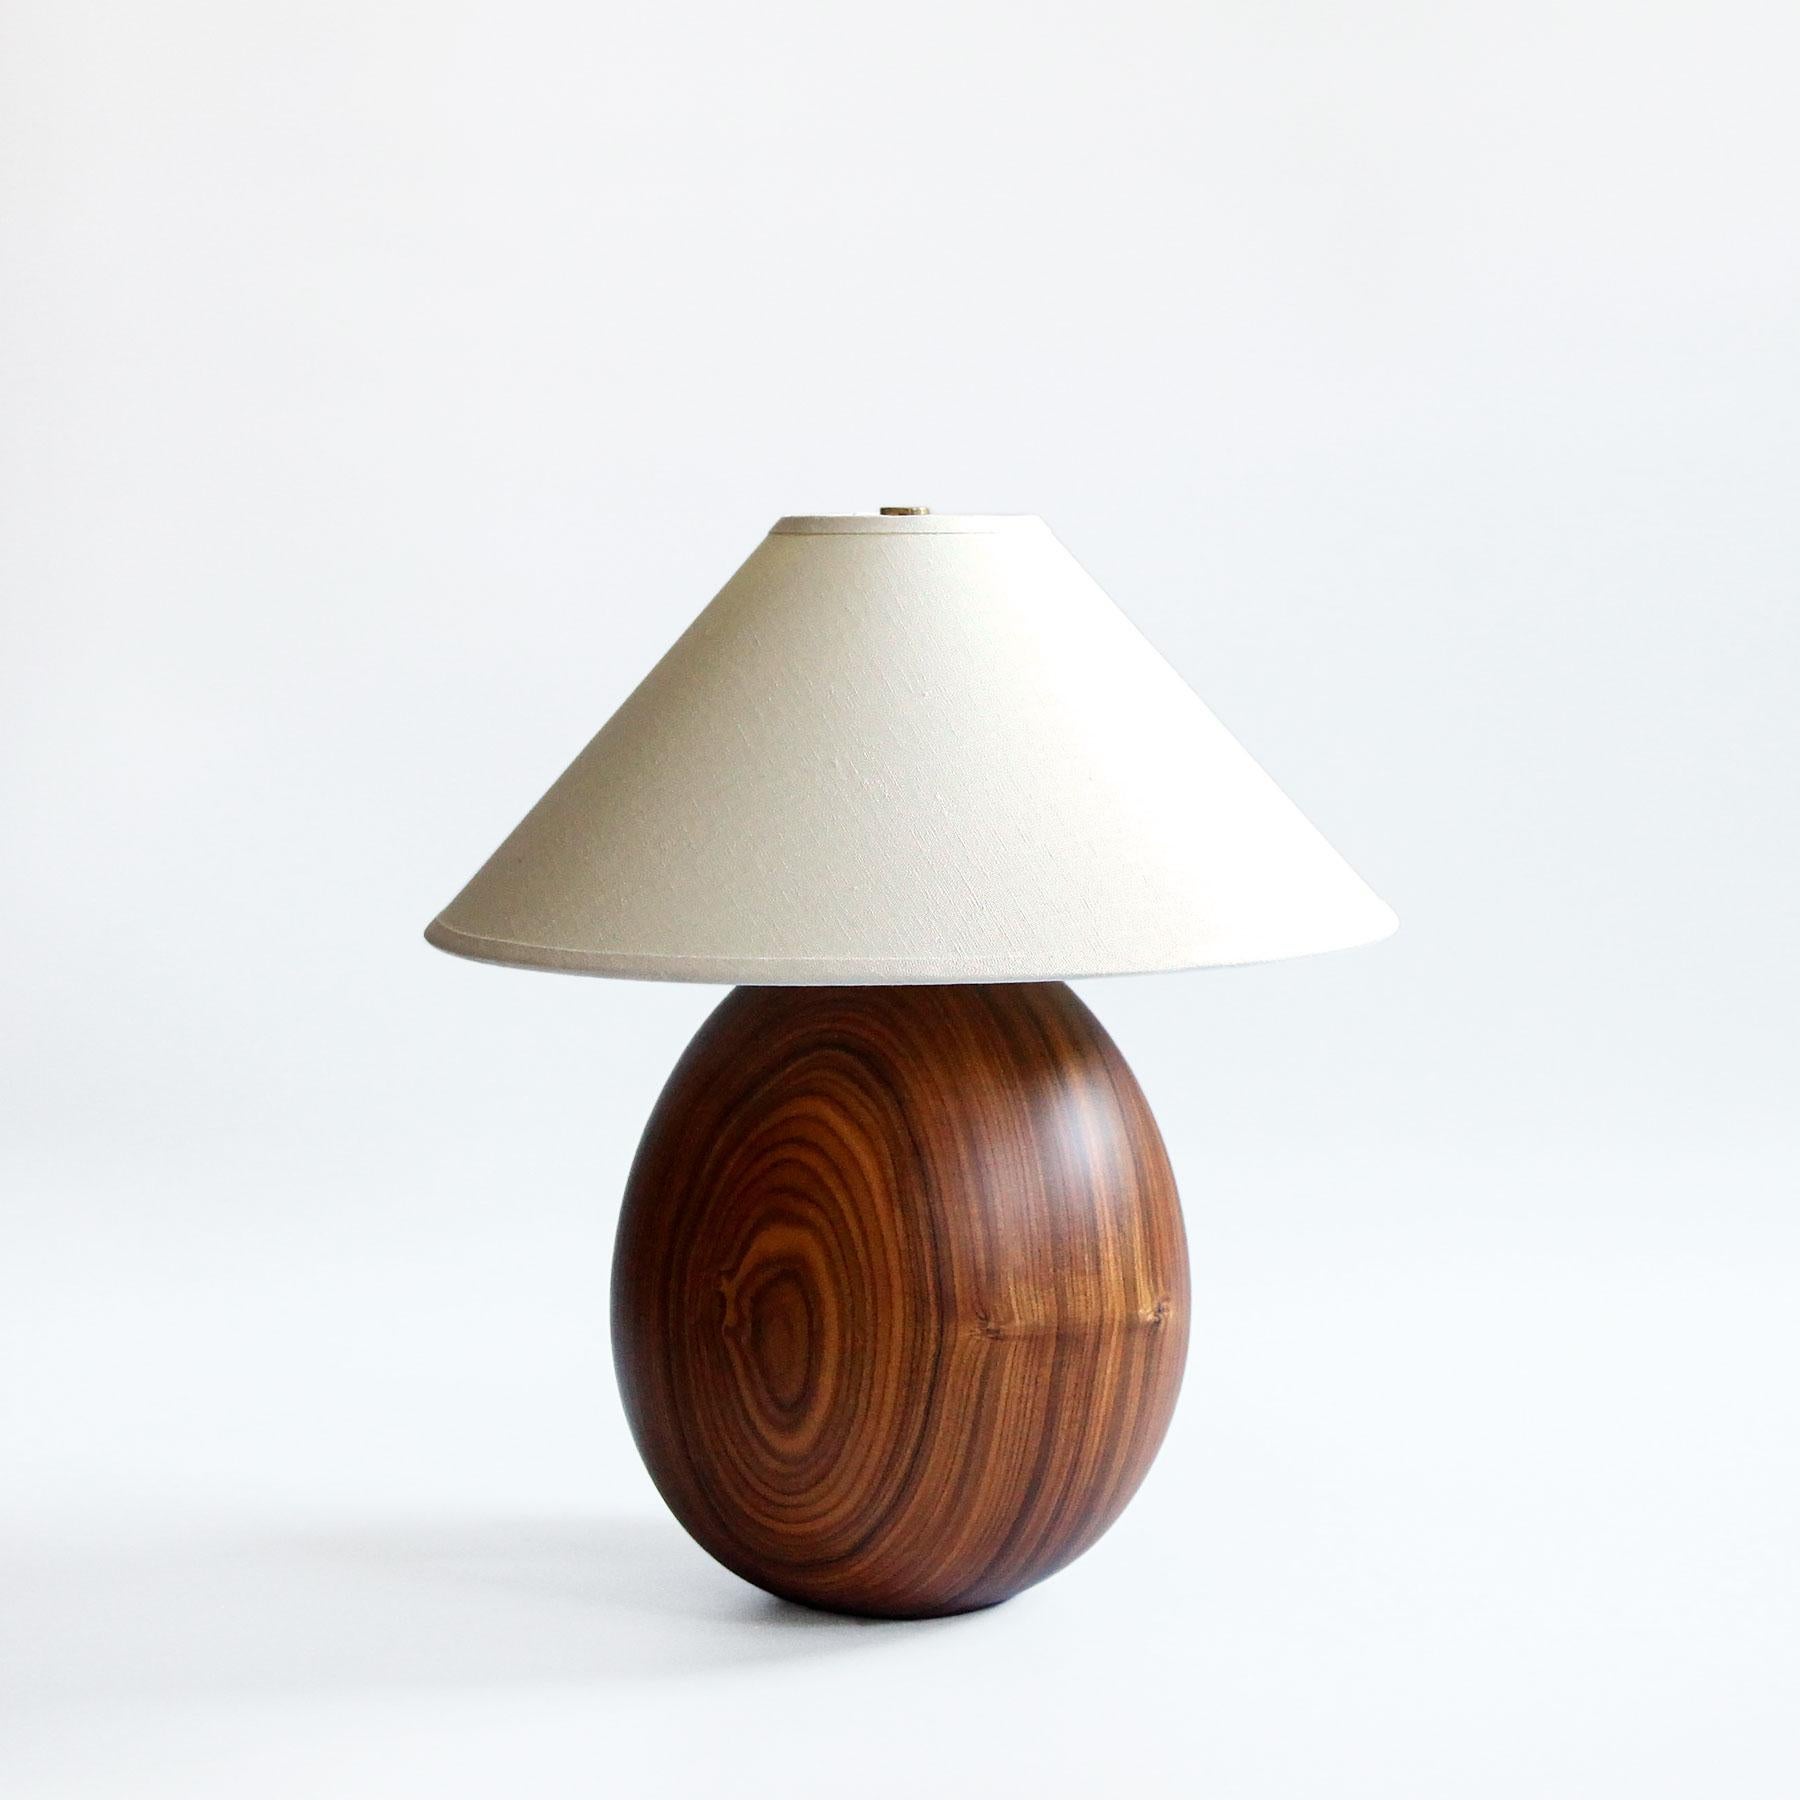 The Árbol collection is an embrace of tropical modernism, each lamp is composed of salvaged tropical hardwoods from the Bolivian city of Santa Cruz, where trees that are felled by natural causes, or for construction, are rescued by our team. A blend